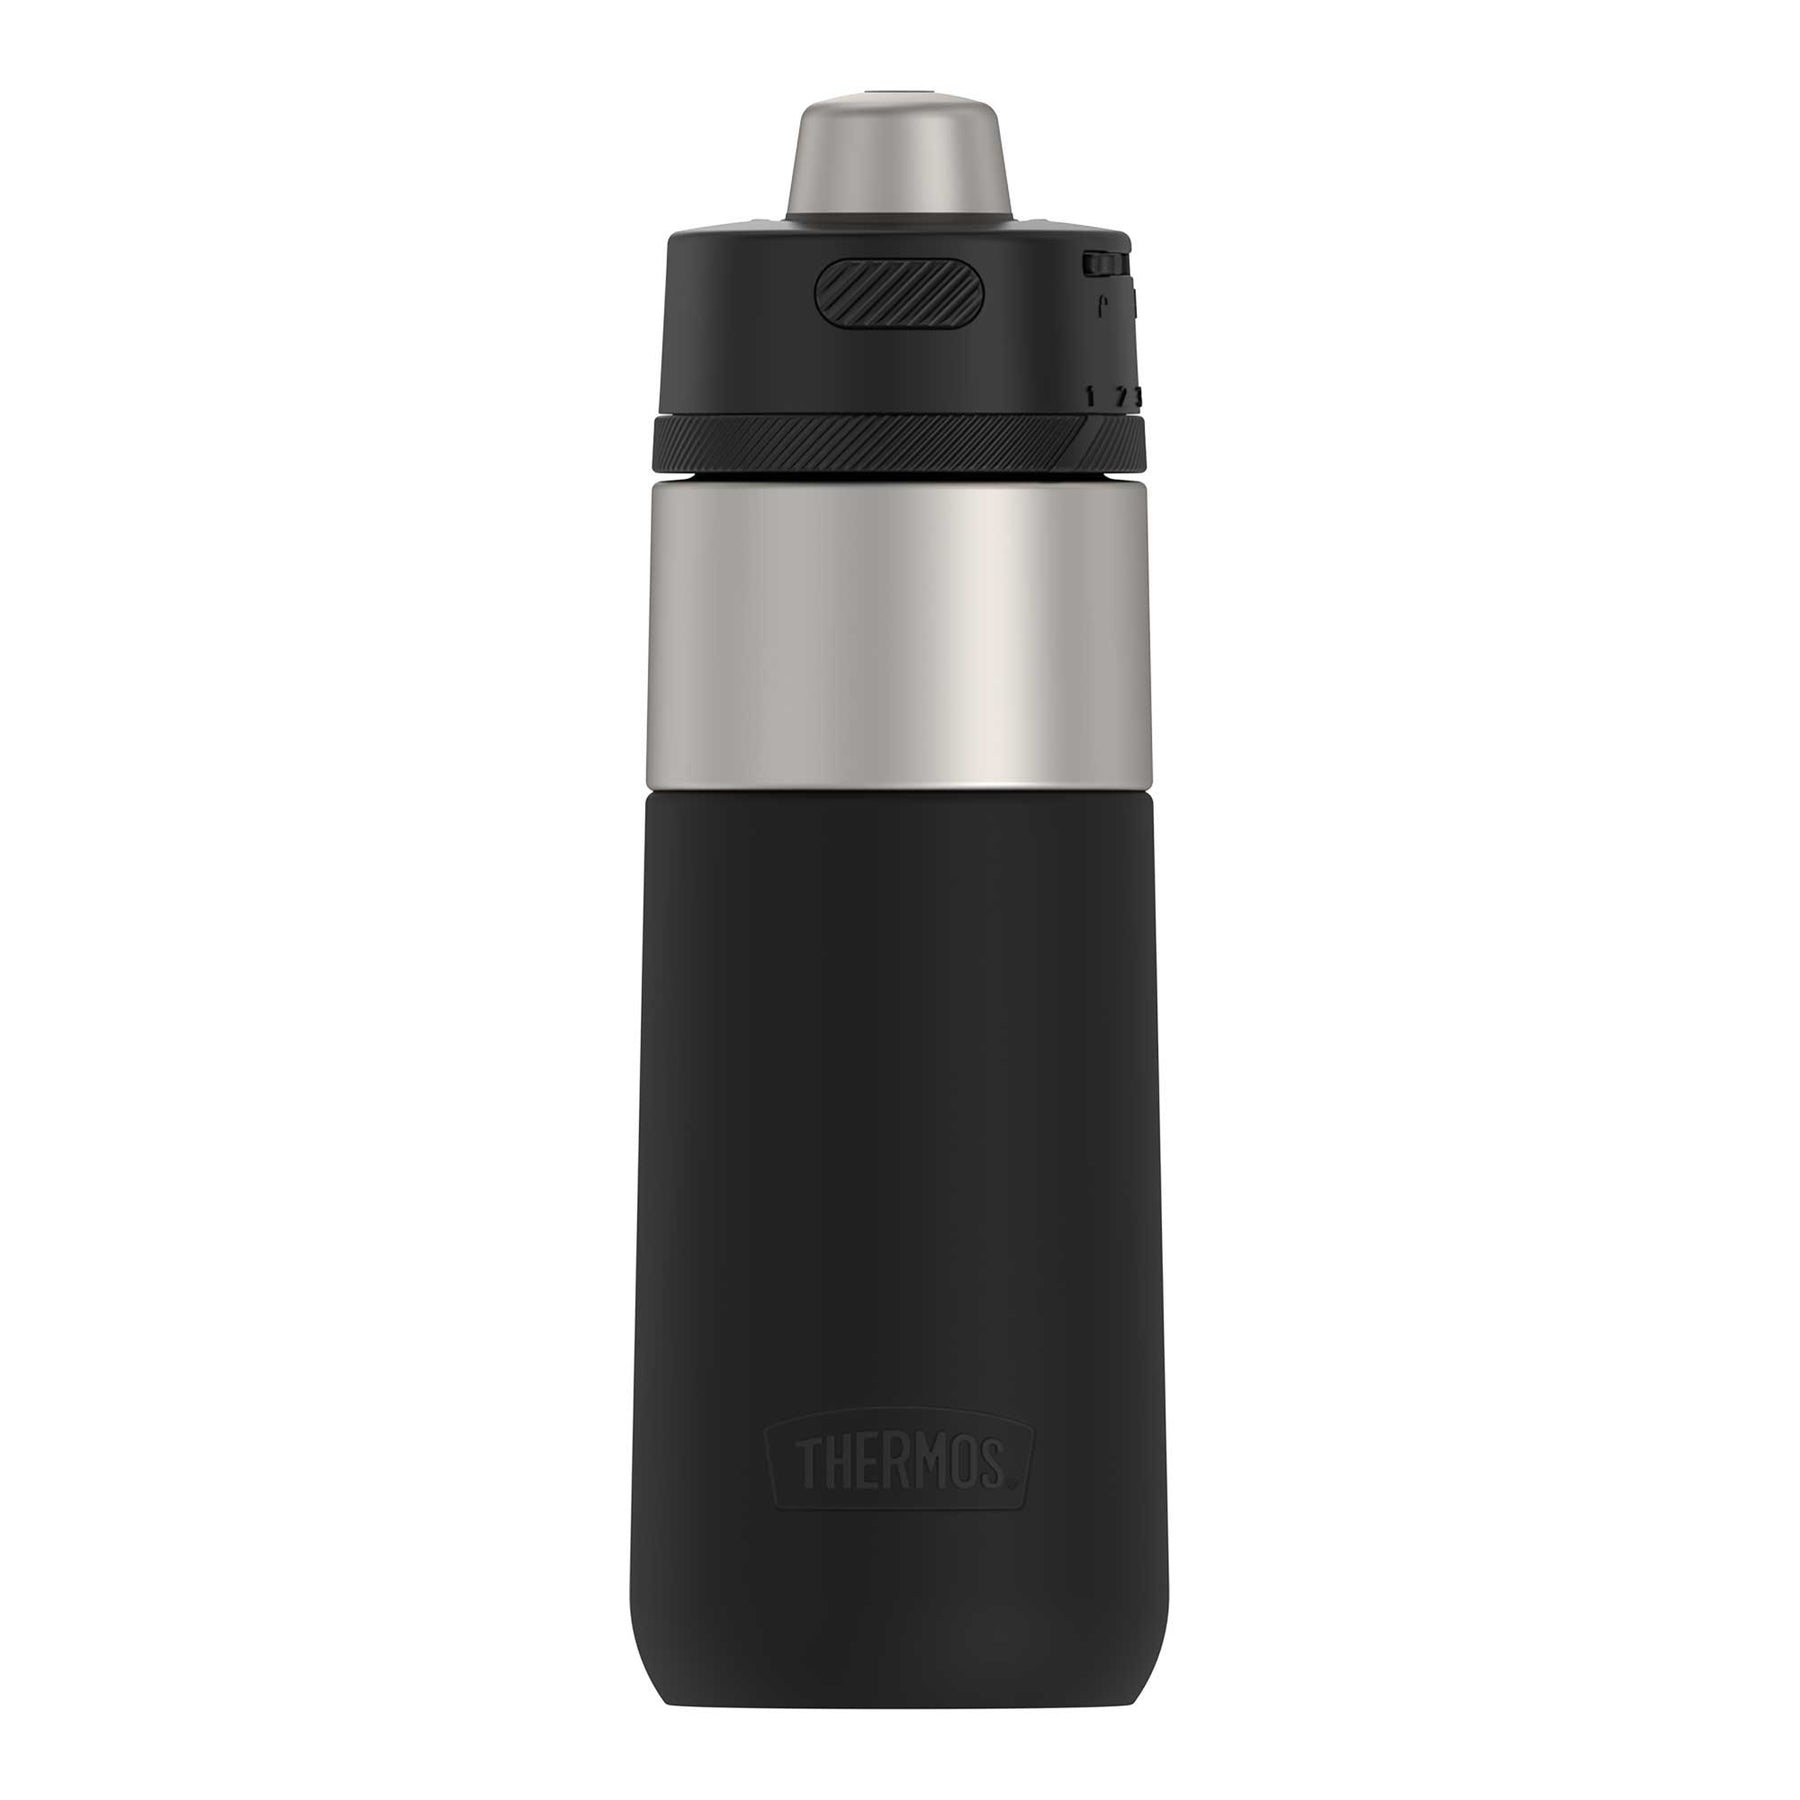 Thermos 18 oz. Stainless Steel Hydration Insulated Vacuum Bottle